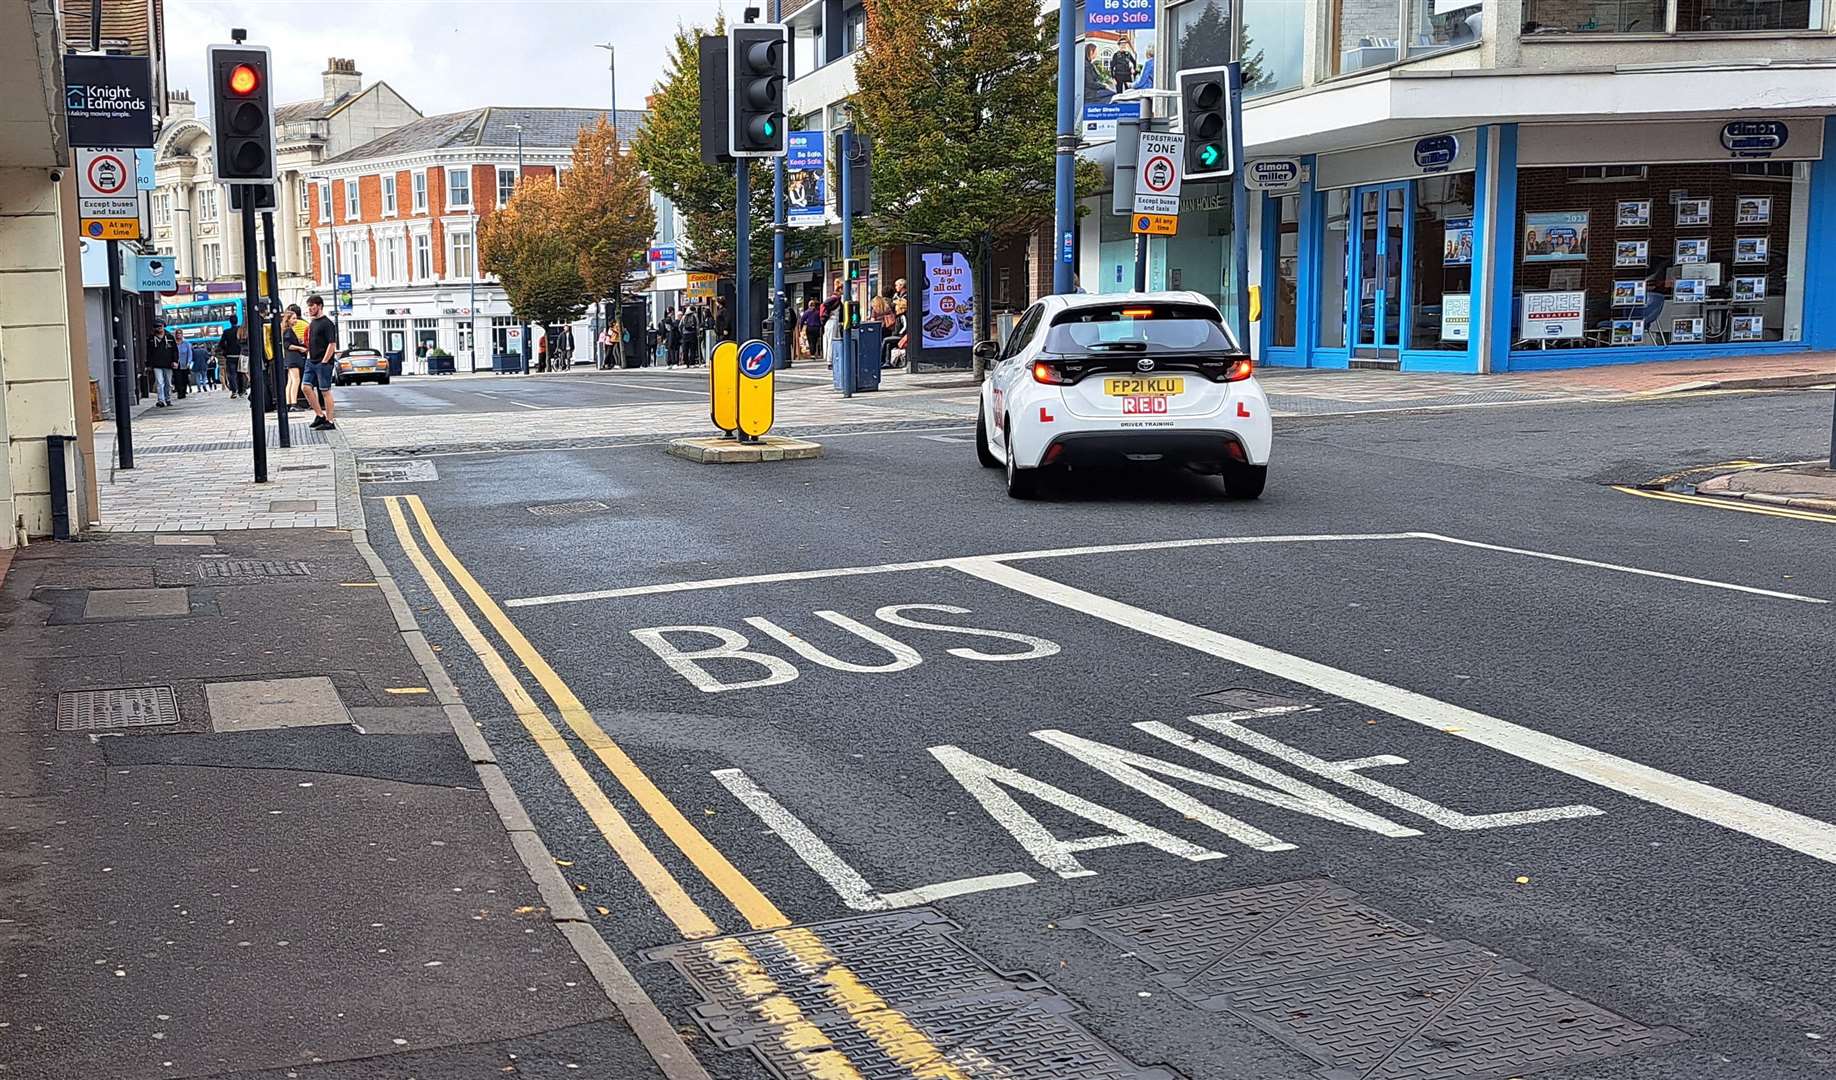 An ANPR camera will be set up at either end of the bus lane entry in the town centre